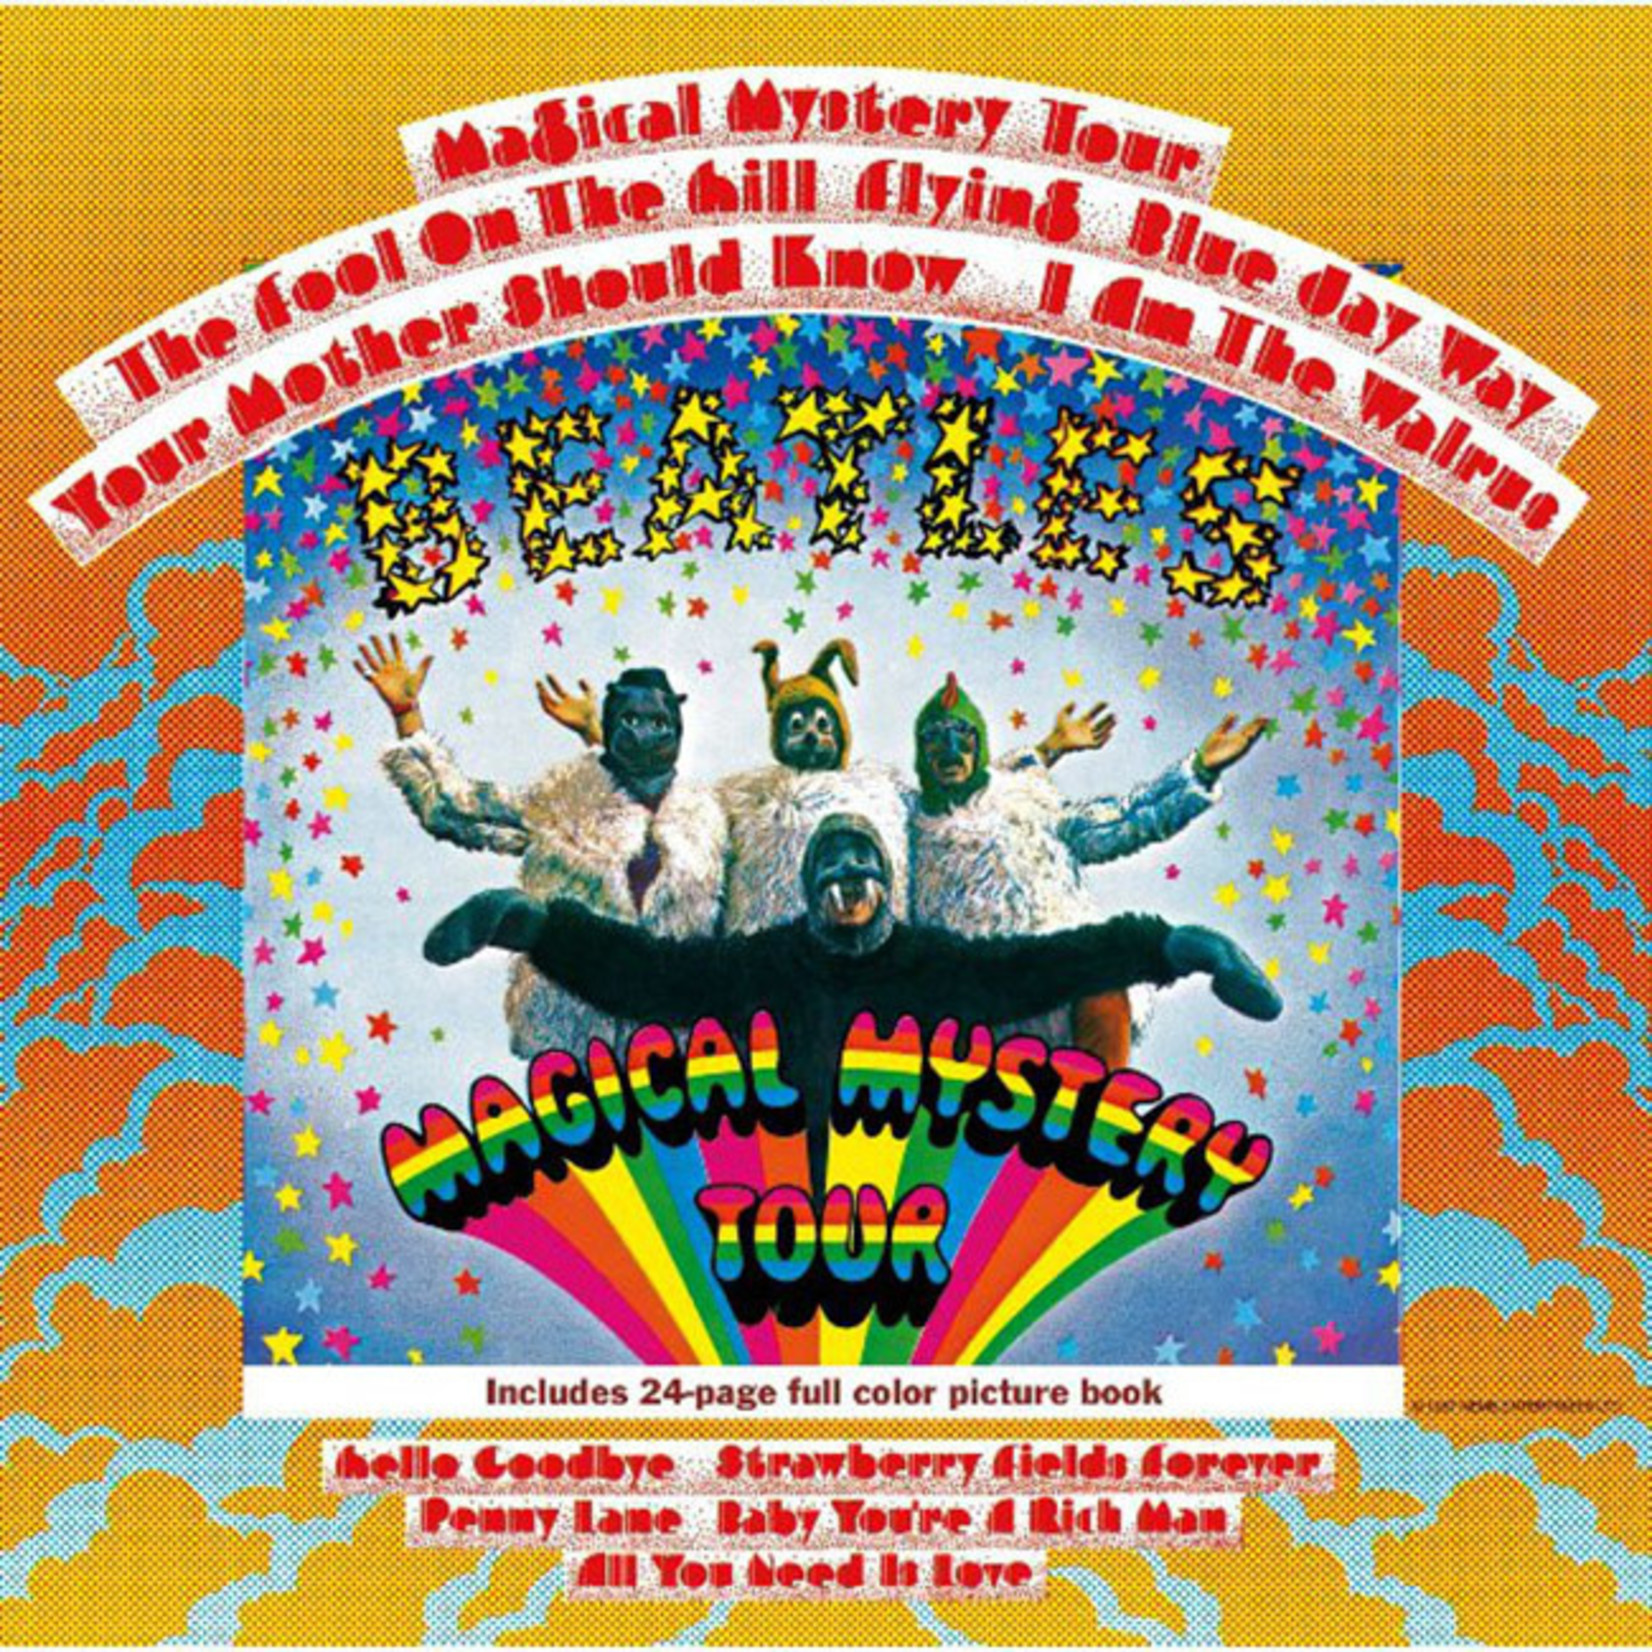 [New] Beatles - Magical Mystery Tour (stereo mix)